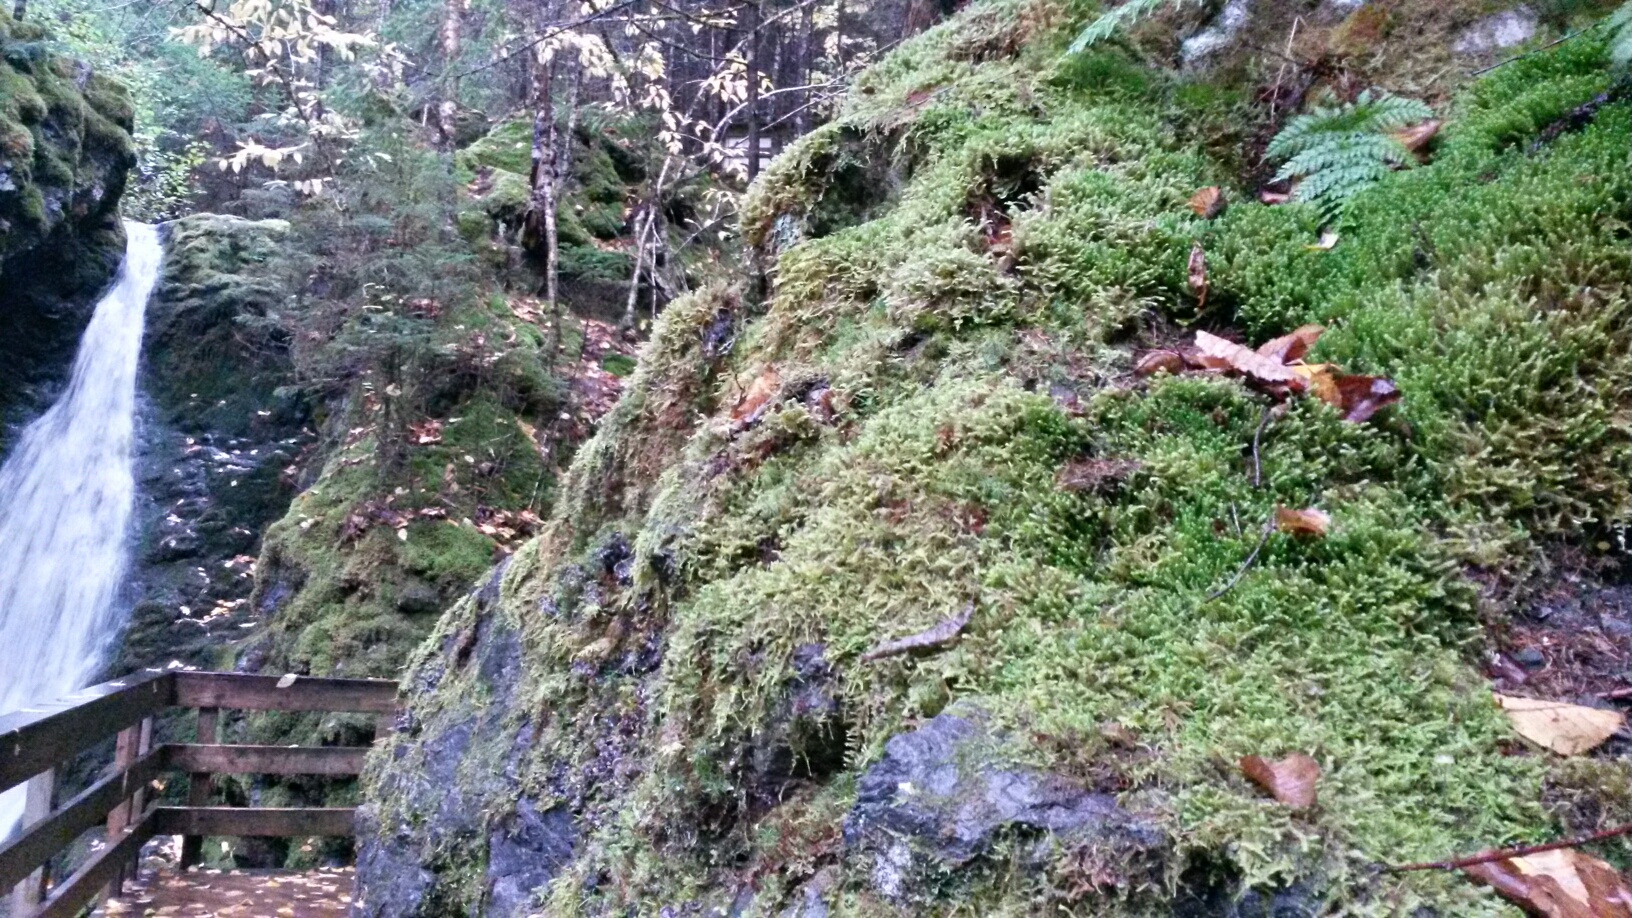 Dickson Falls, with moss